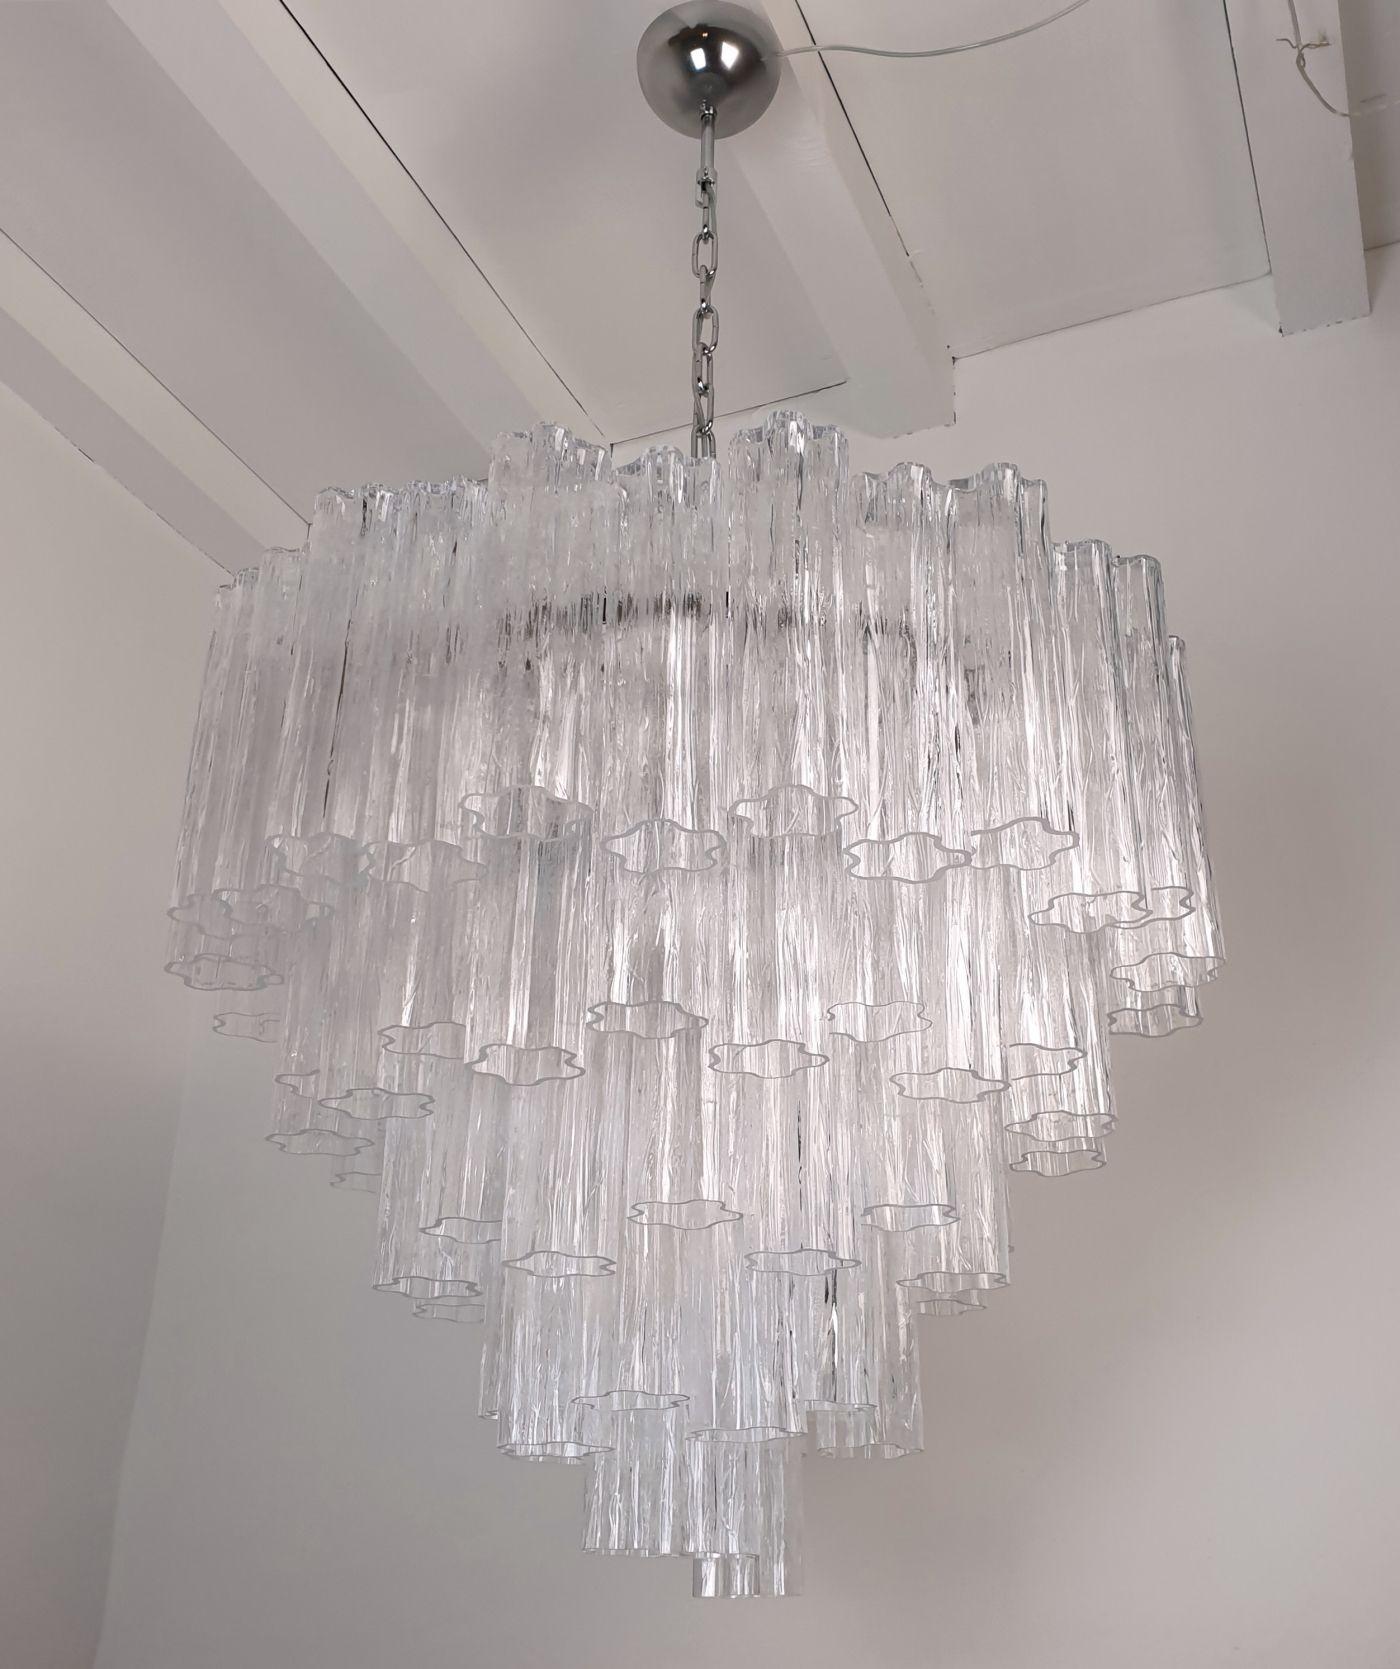 Large Tronchi Murano glass Mid Century Modern chandelier, created by Toni Zuccheri for Venini, Italy 1980s.
The chandelier has a nickel frame, with 7 lights.
Rewired for the US with Medium base bulbs sockets, or E26. (you can use LED ones)
The